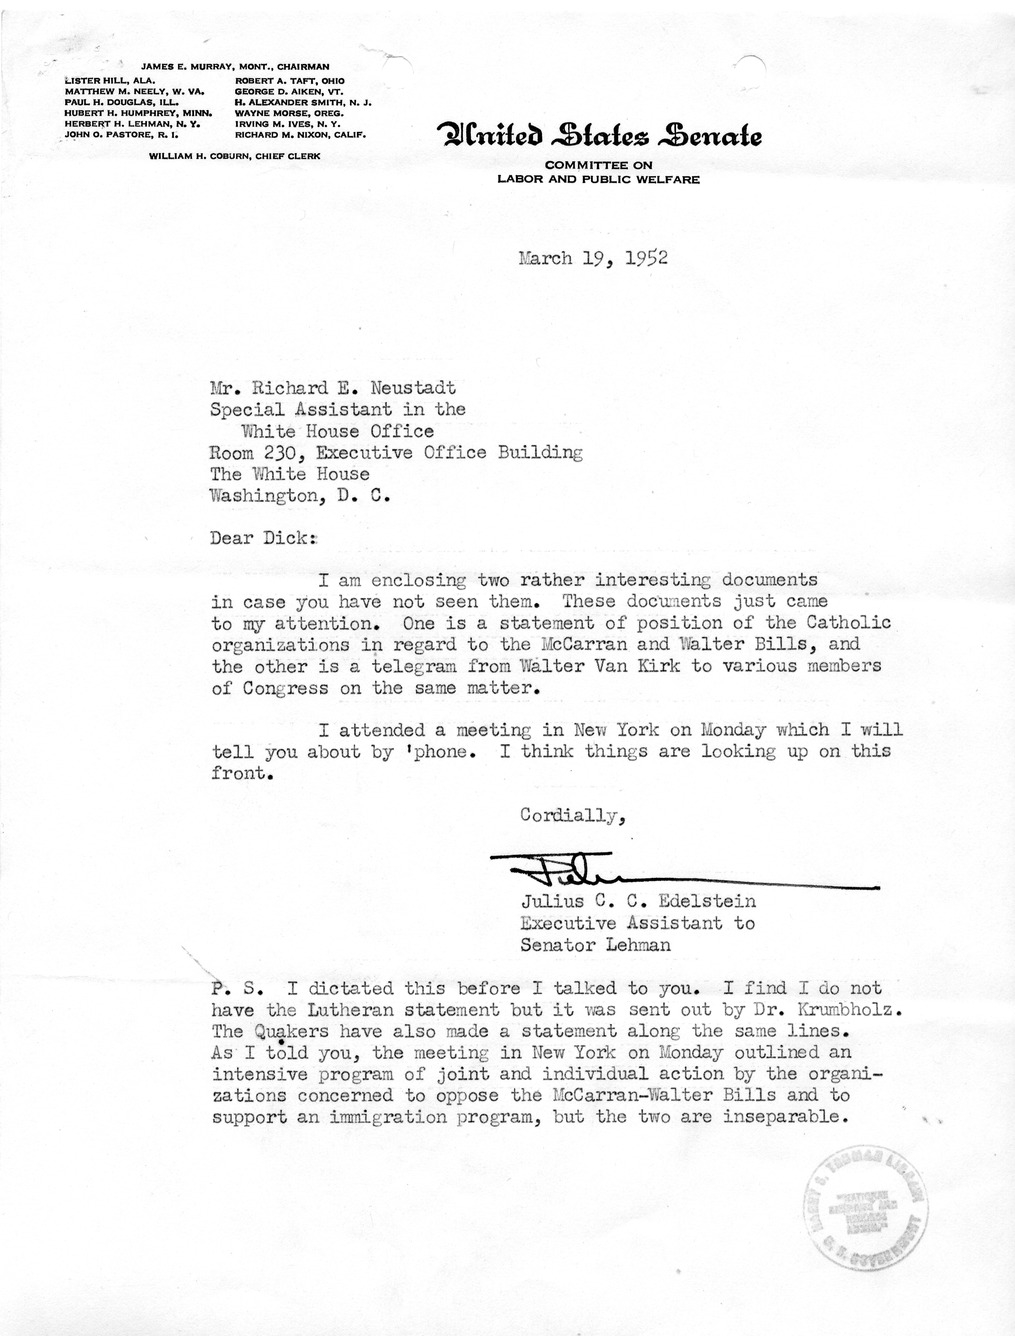 Letter from Julius Edelstein to Richard Neustadt, With Attachments